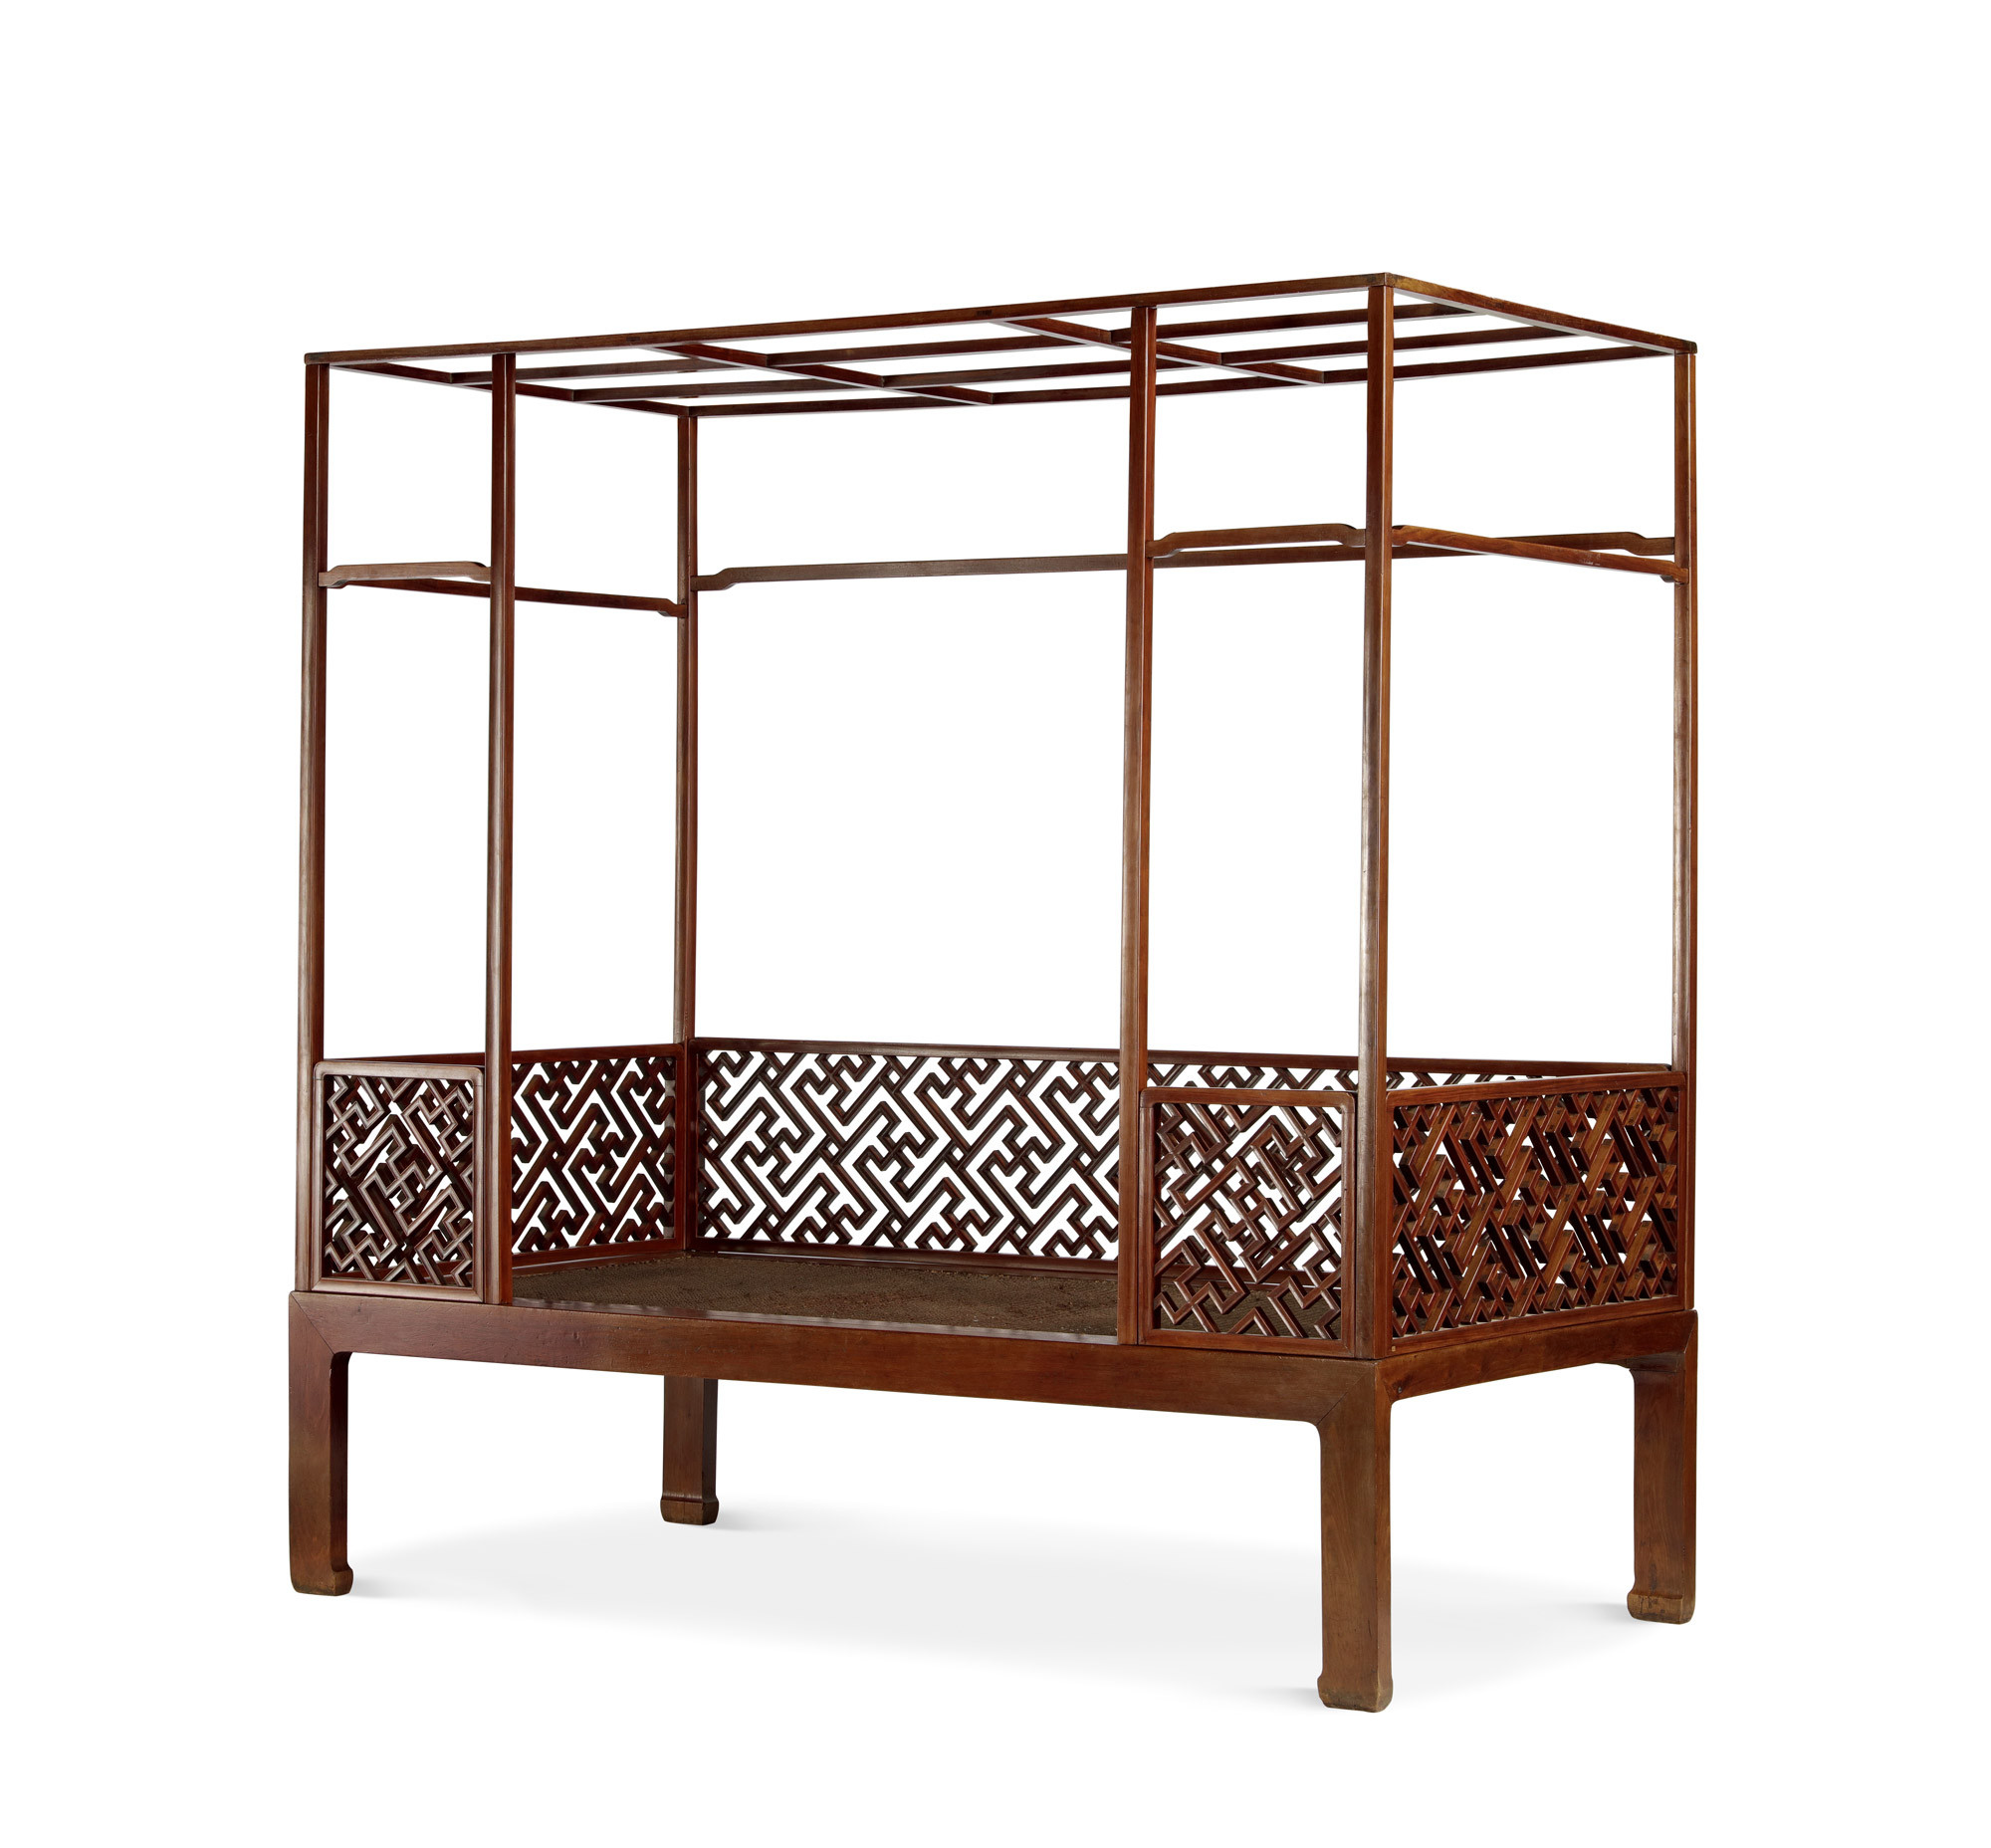 HUANGHUALI SWASTIKA CANOPY BED WITH SIX PILLARS